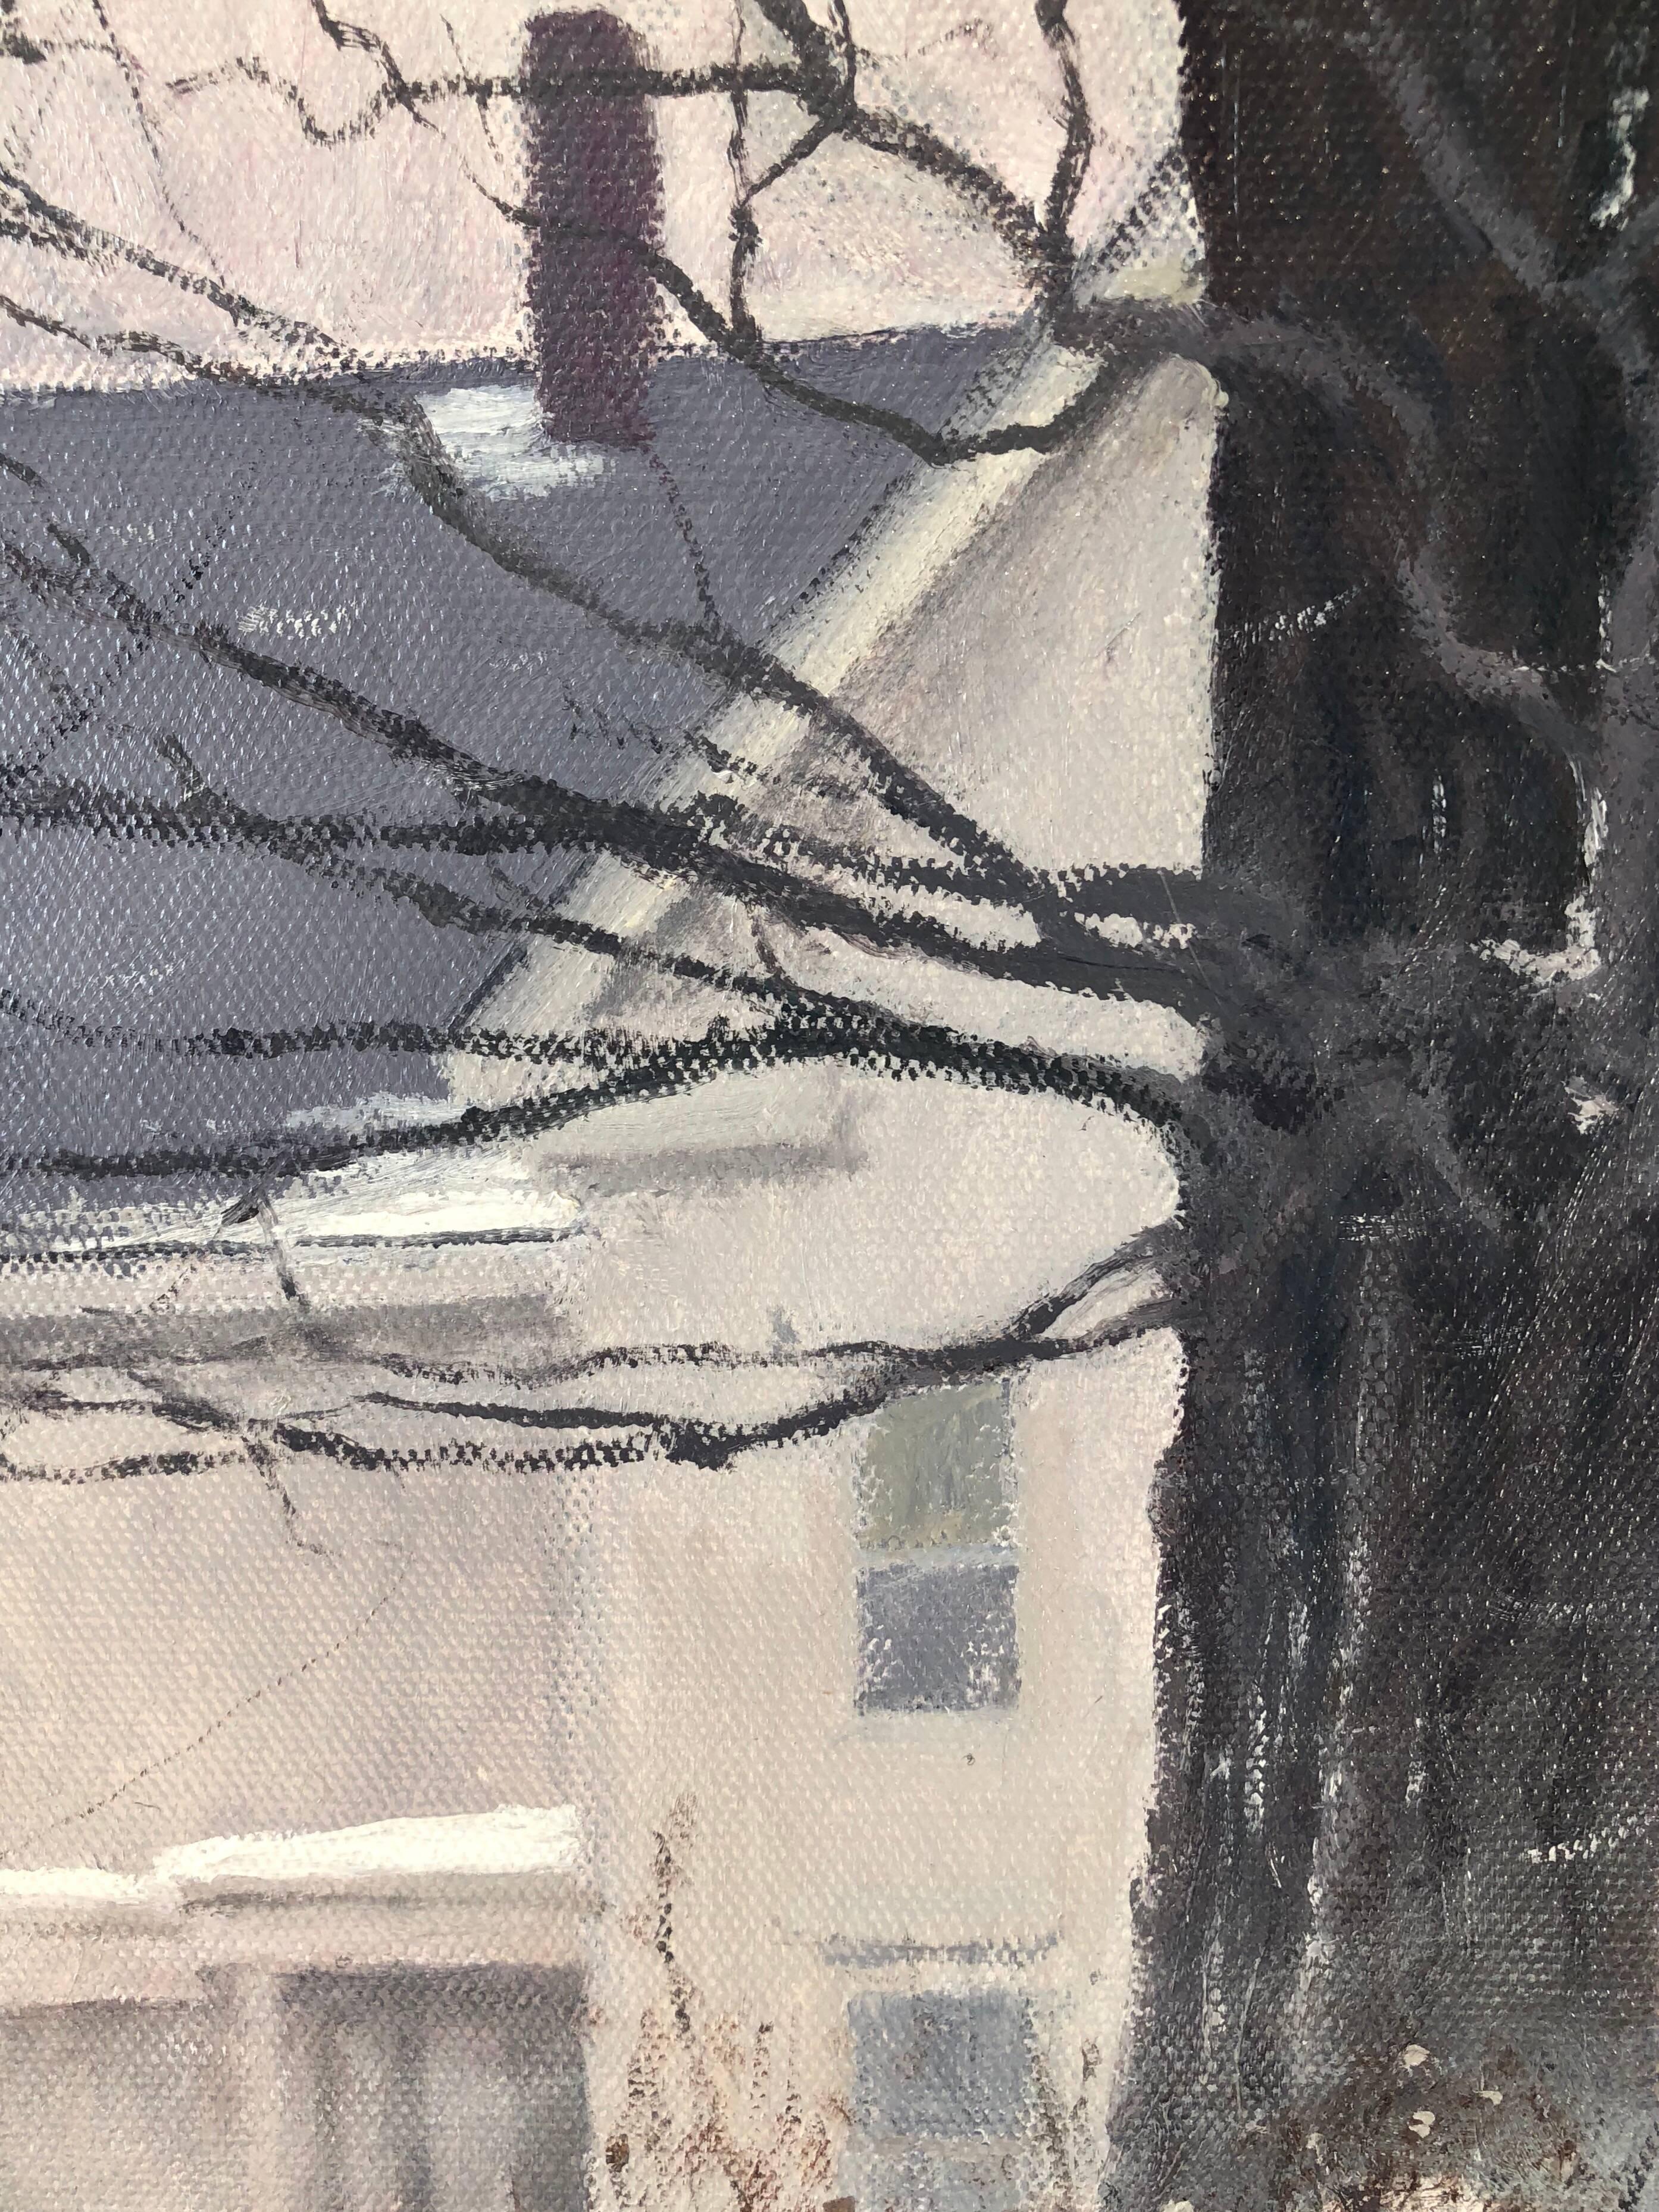 Nor’easter - Gray Landscape Painting by Brian Kliewer